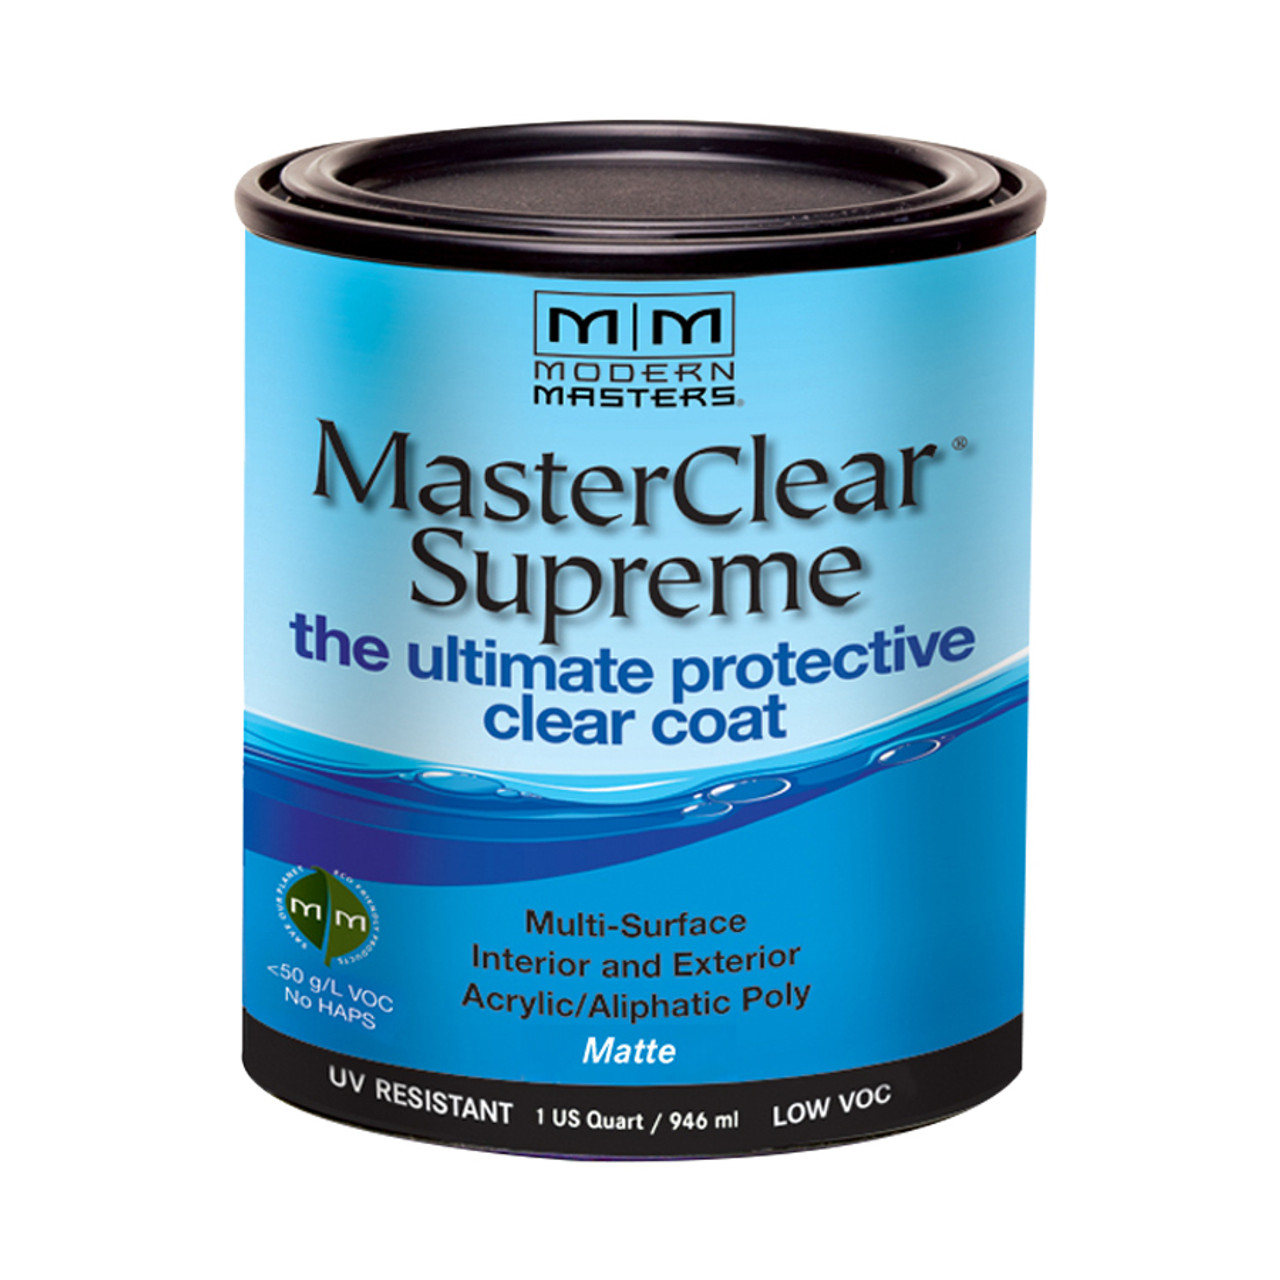 Matte Clear Coat: 9 Tips for Mastering its Application